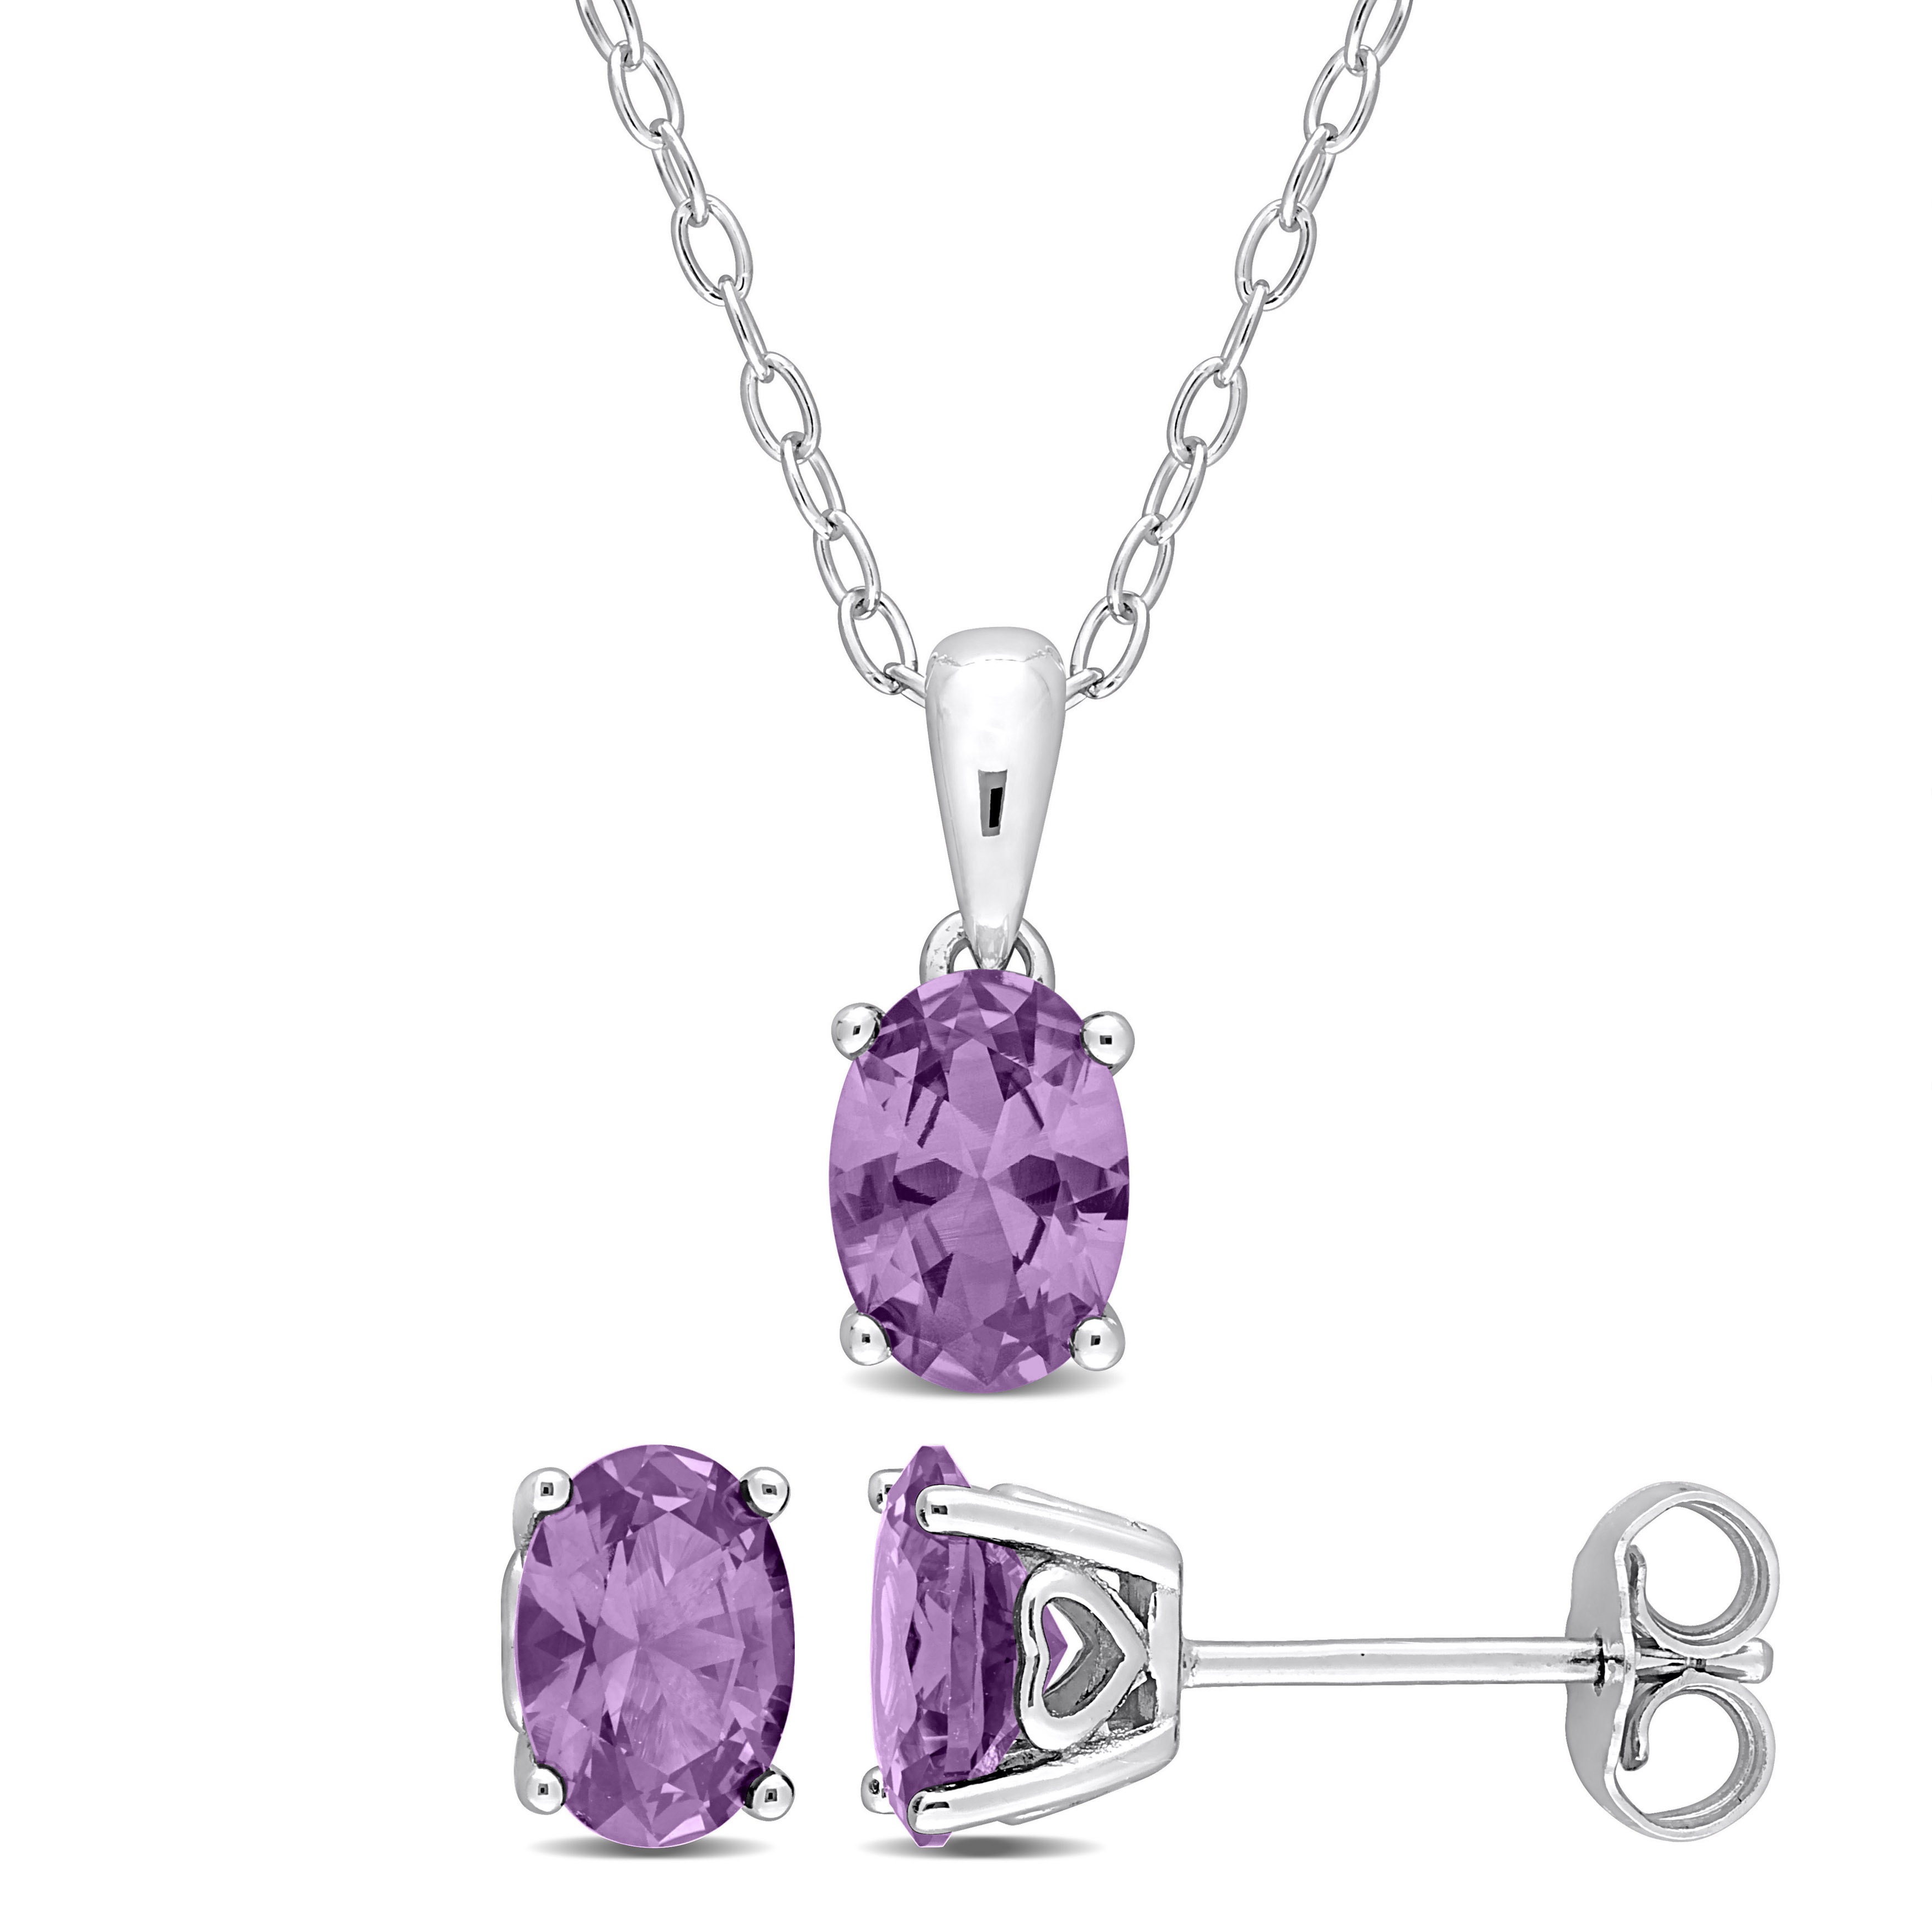 3 3/4 CT TGW Oval Simulated Alexandrite 2-Piece Set of Pendant with Chain and Earrings in Sterling Silver